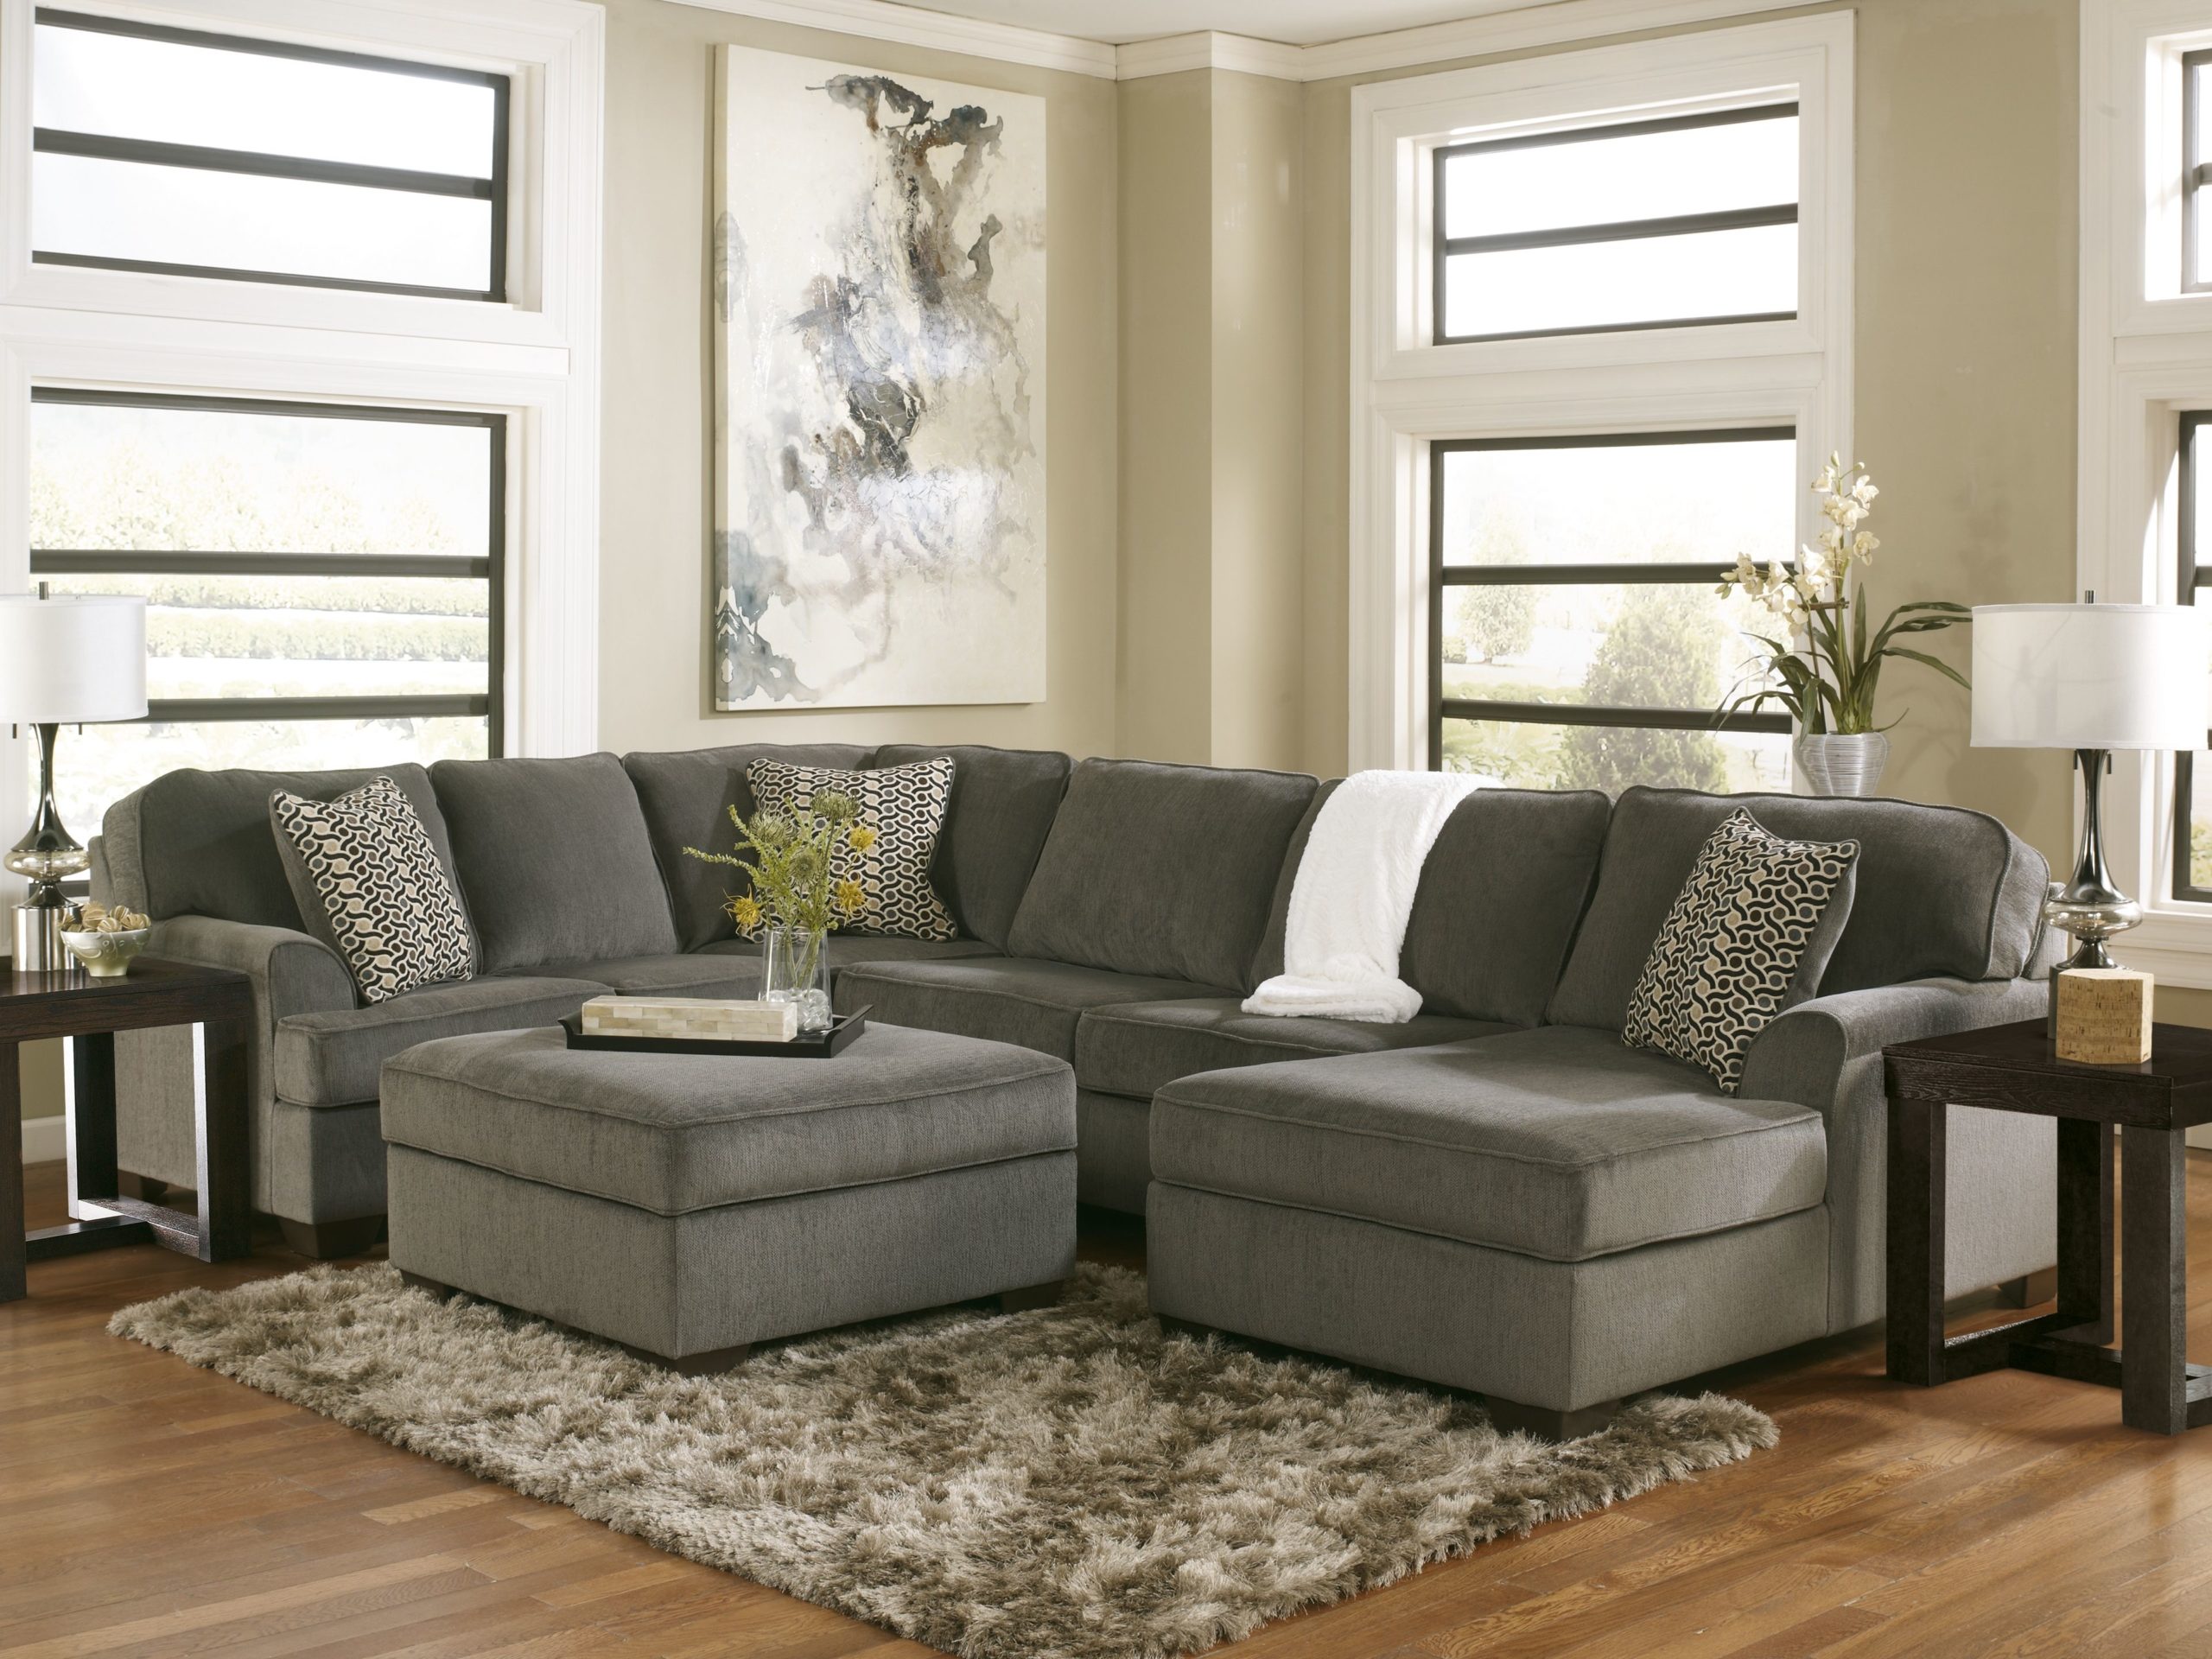 Show Me Sectional For Living Room Grey